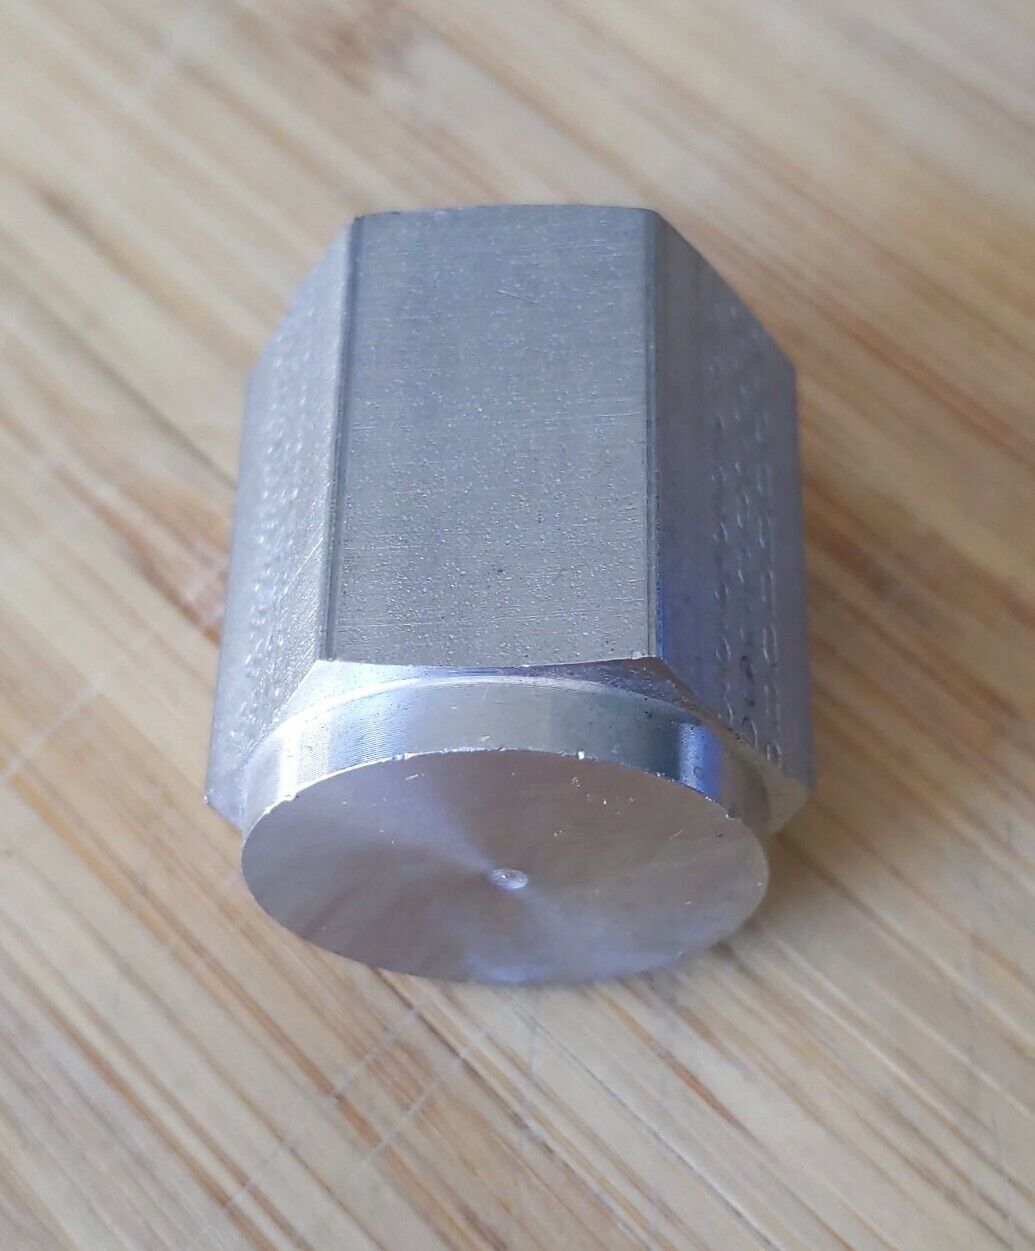 Parker SS-6-CP New Stainless Pipe Cap Fitting 3/8" Female NPT 5300 PSI (BL108) - 0